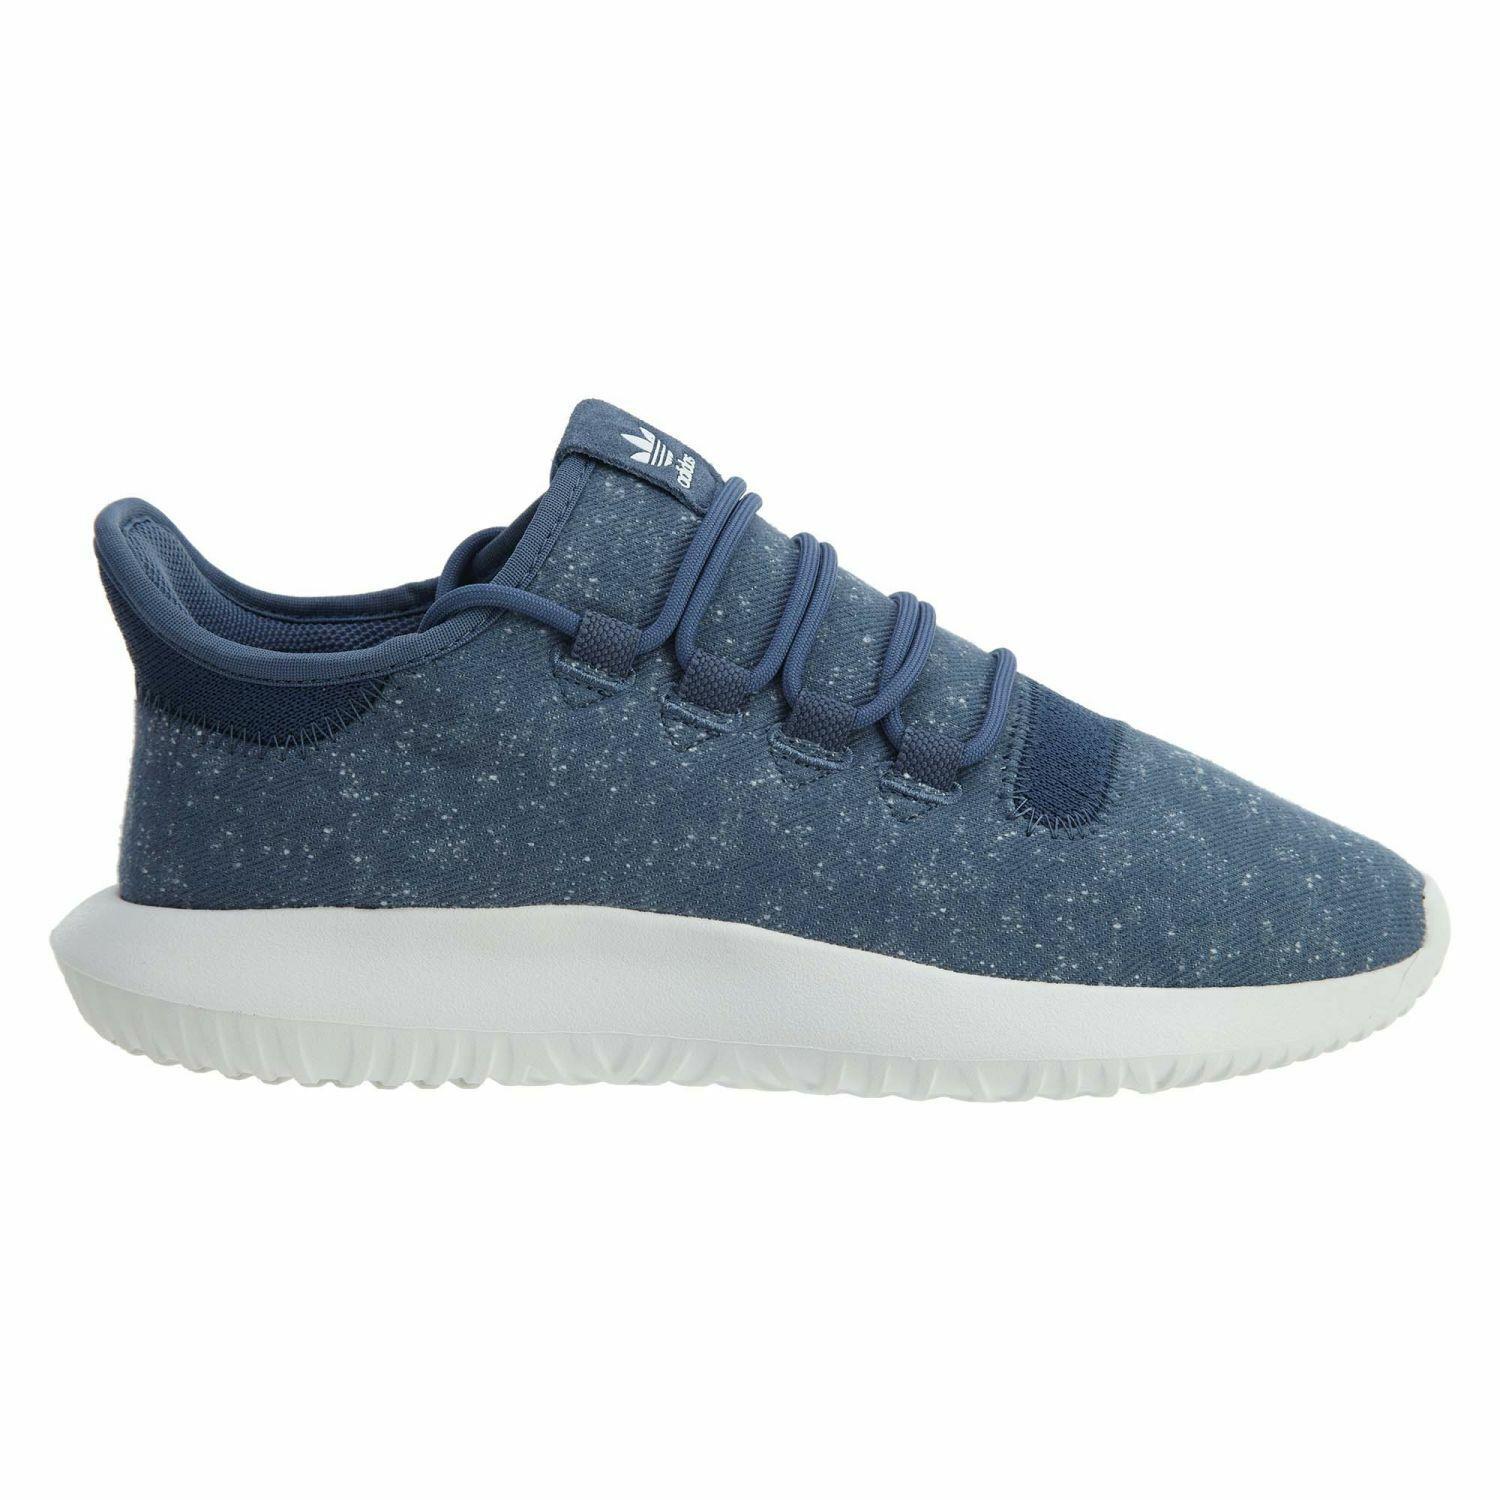 Adidas Tubular Shadow Mens BY3572 Tech Ink White Textile Athletic Shoes Size 8 - Tech Ink